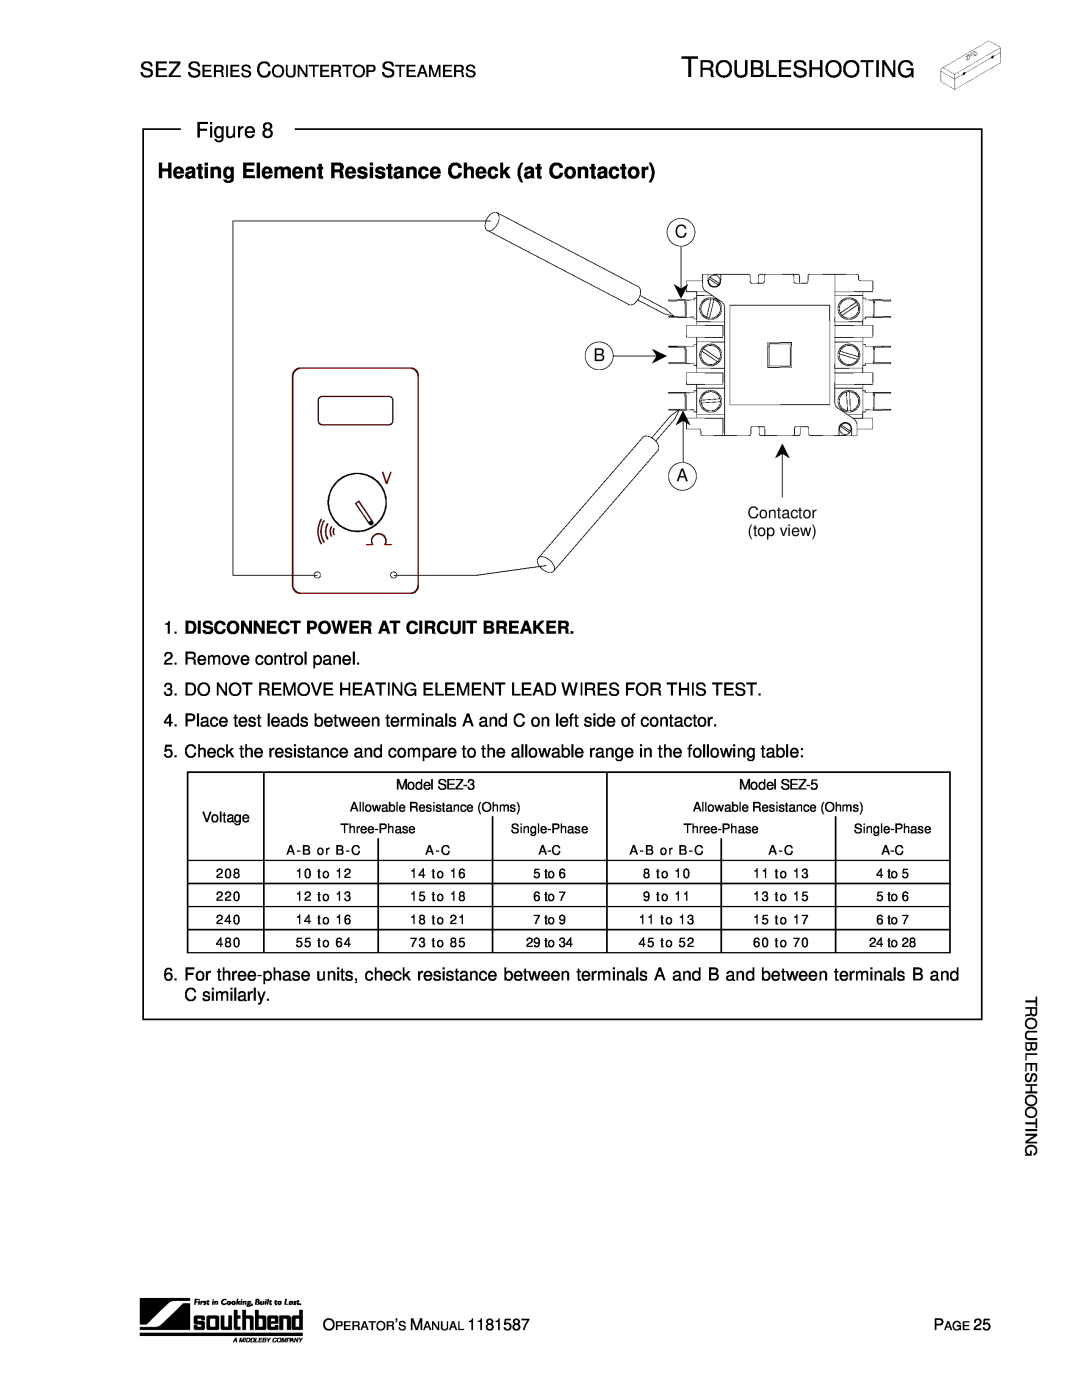 Southbend SEZ-3, SEZ-5 Heating Element Resistance Check at Contactor, Troubleshooting, Disconnect Power At Circuit Breaker 